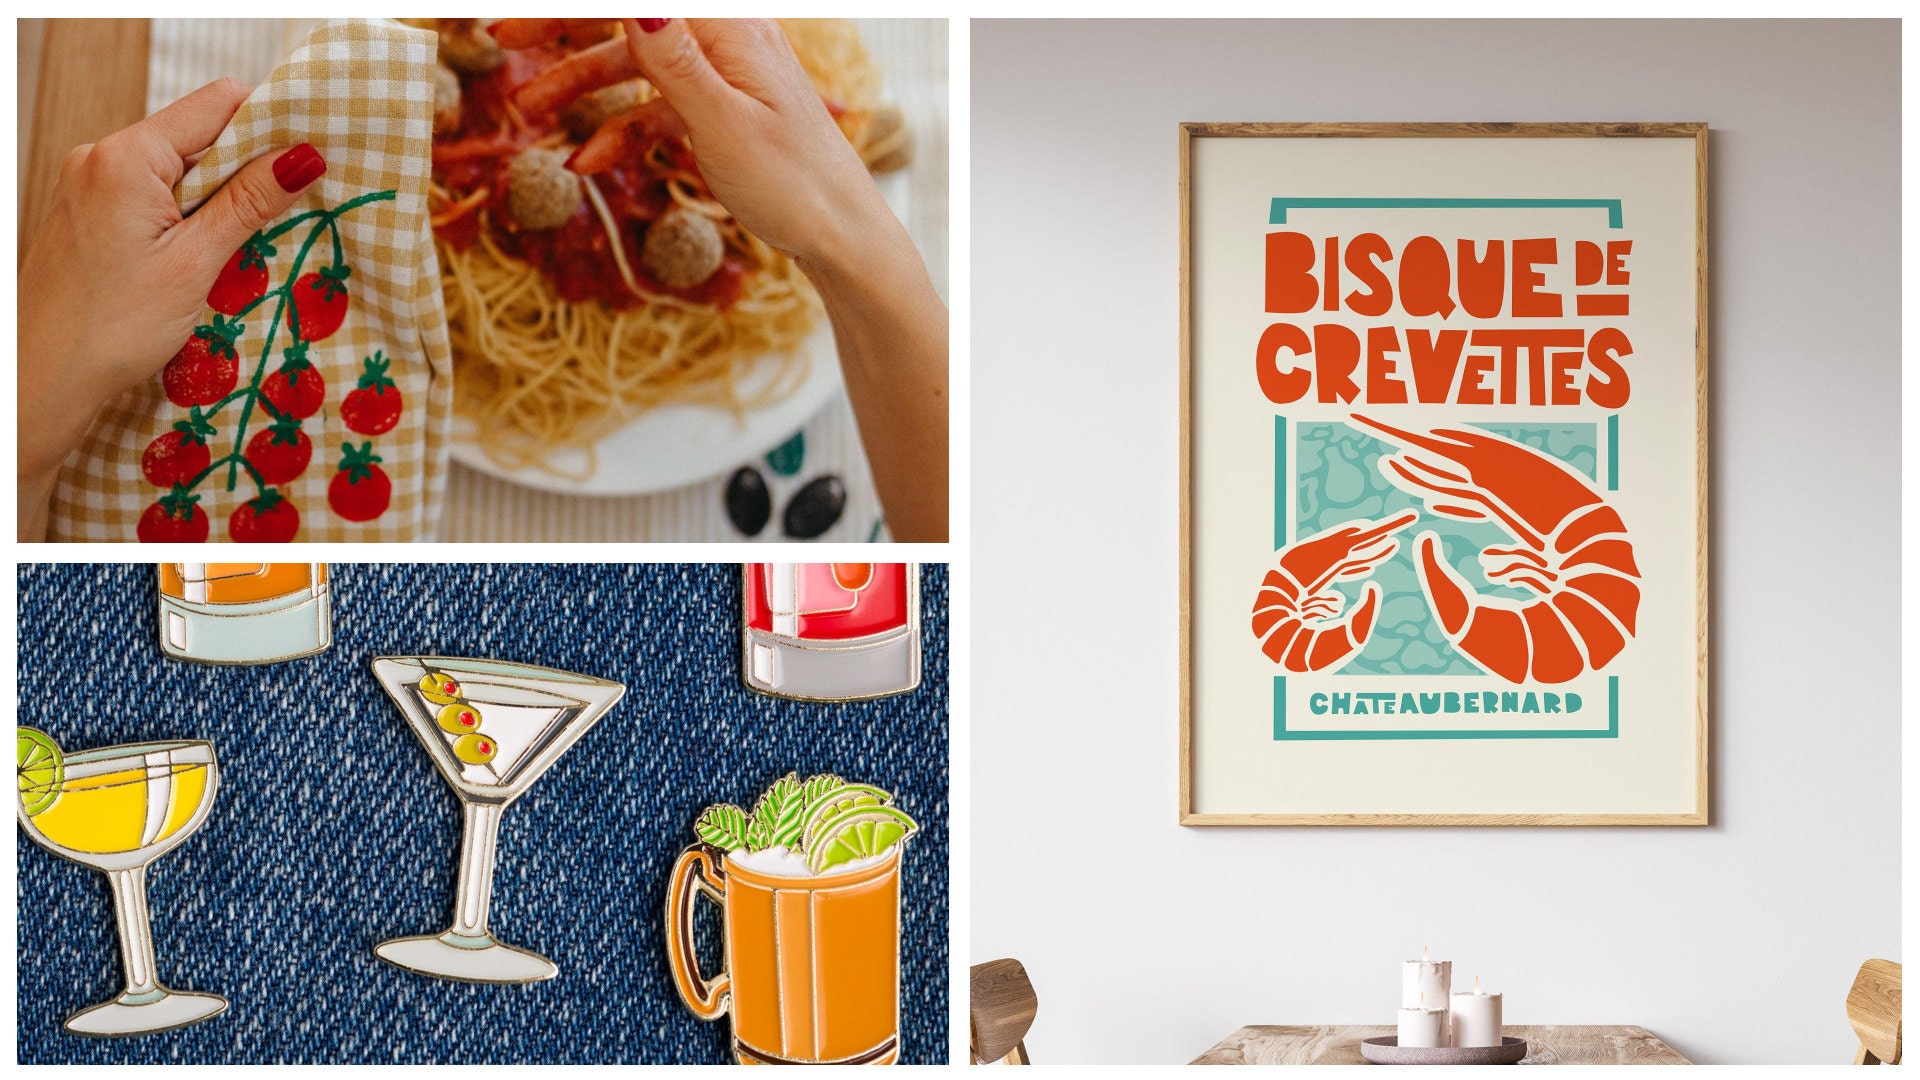 An array of colorful food-related items, including an embroidered napkin with cherry tomatoes, a martini lapel pin, and a retro lobster poster